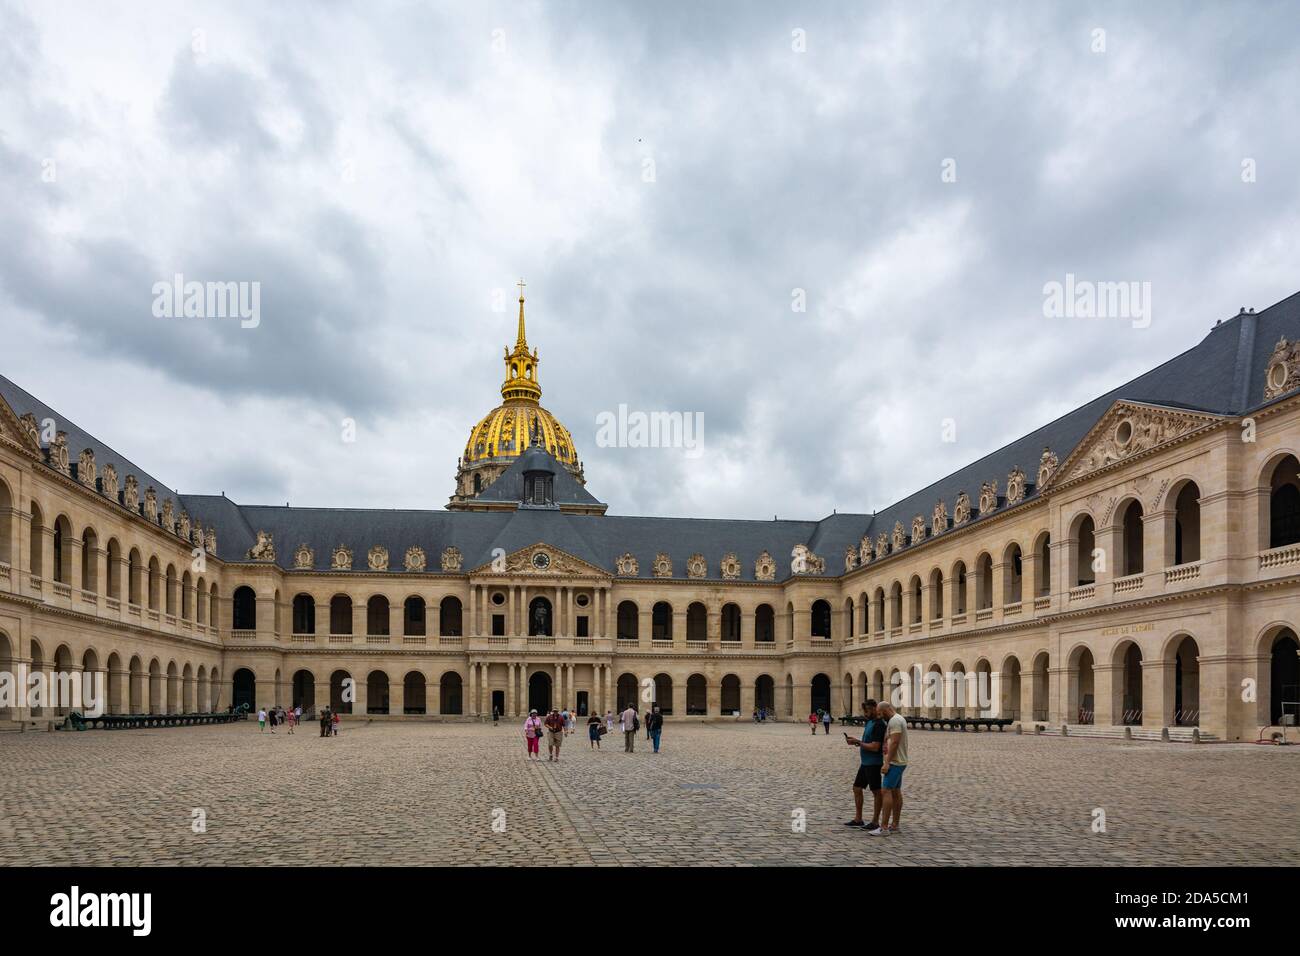 Paris, France - August 29, 2019 : Court of honor in Palace Les Invalides, or National Residence of the Invalids courtyard. Complex of museums and monu Stock Photo